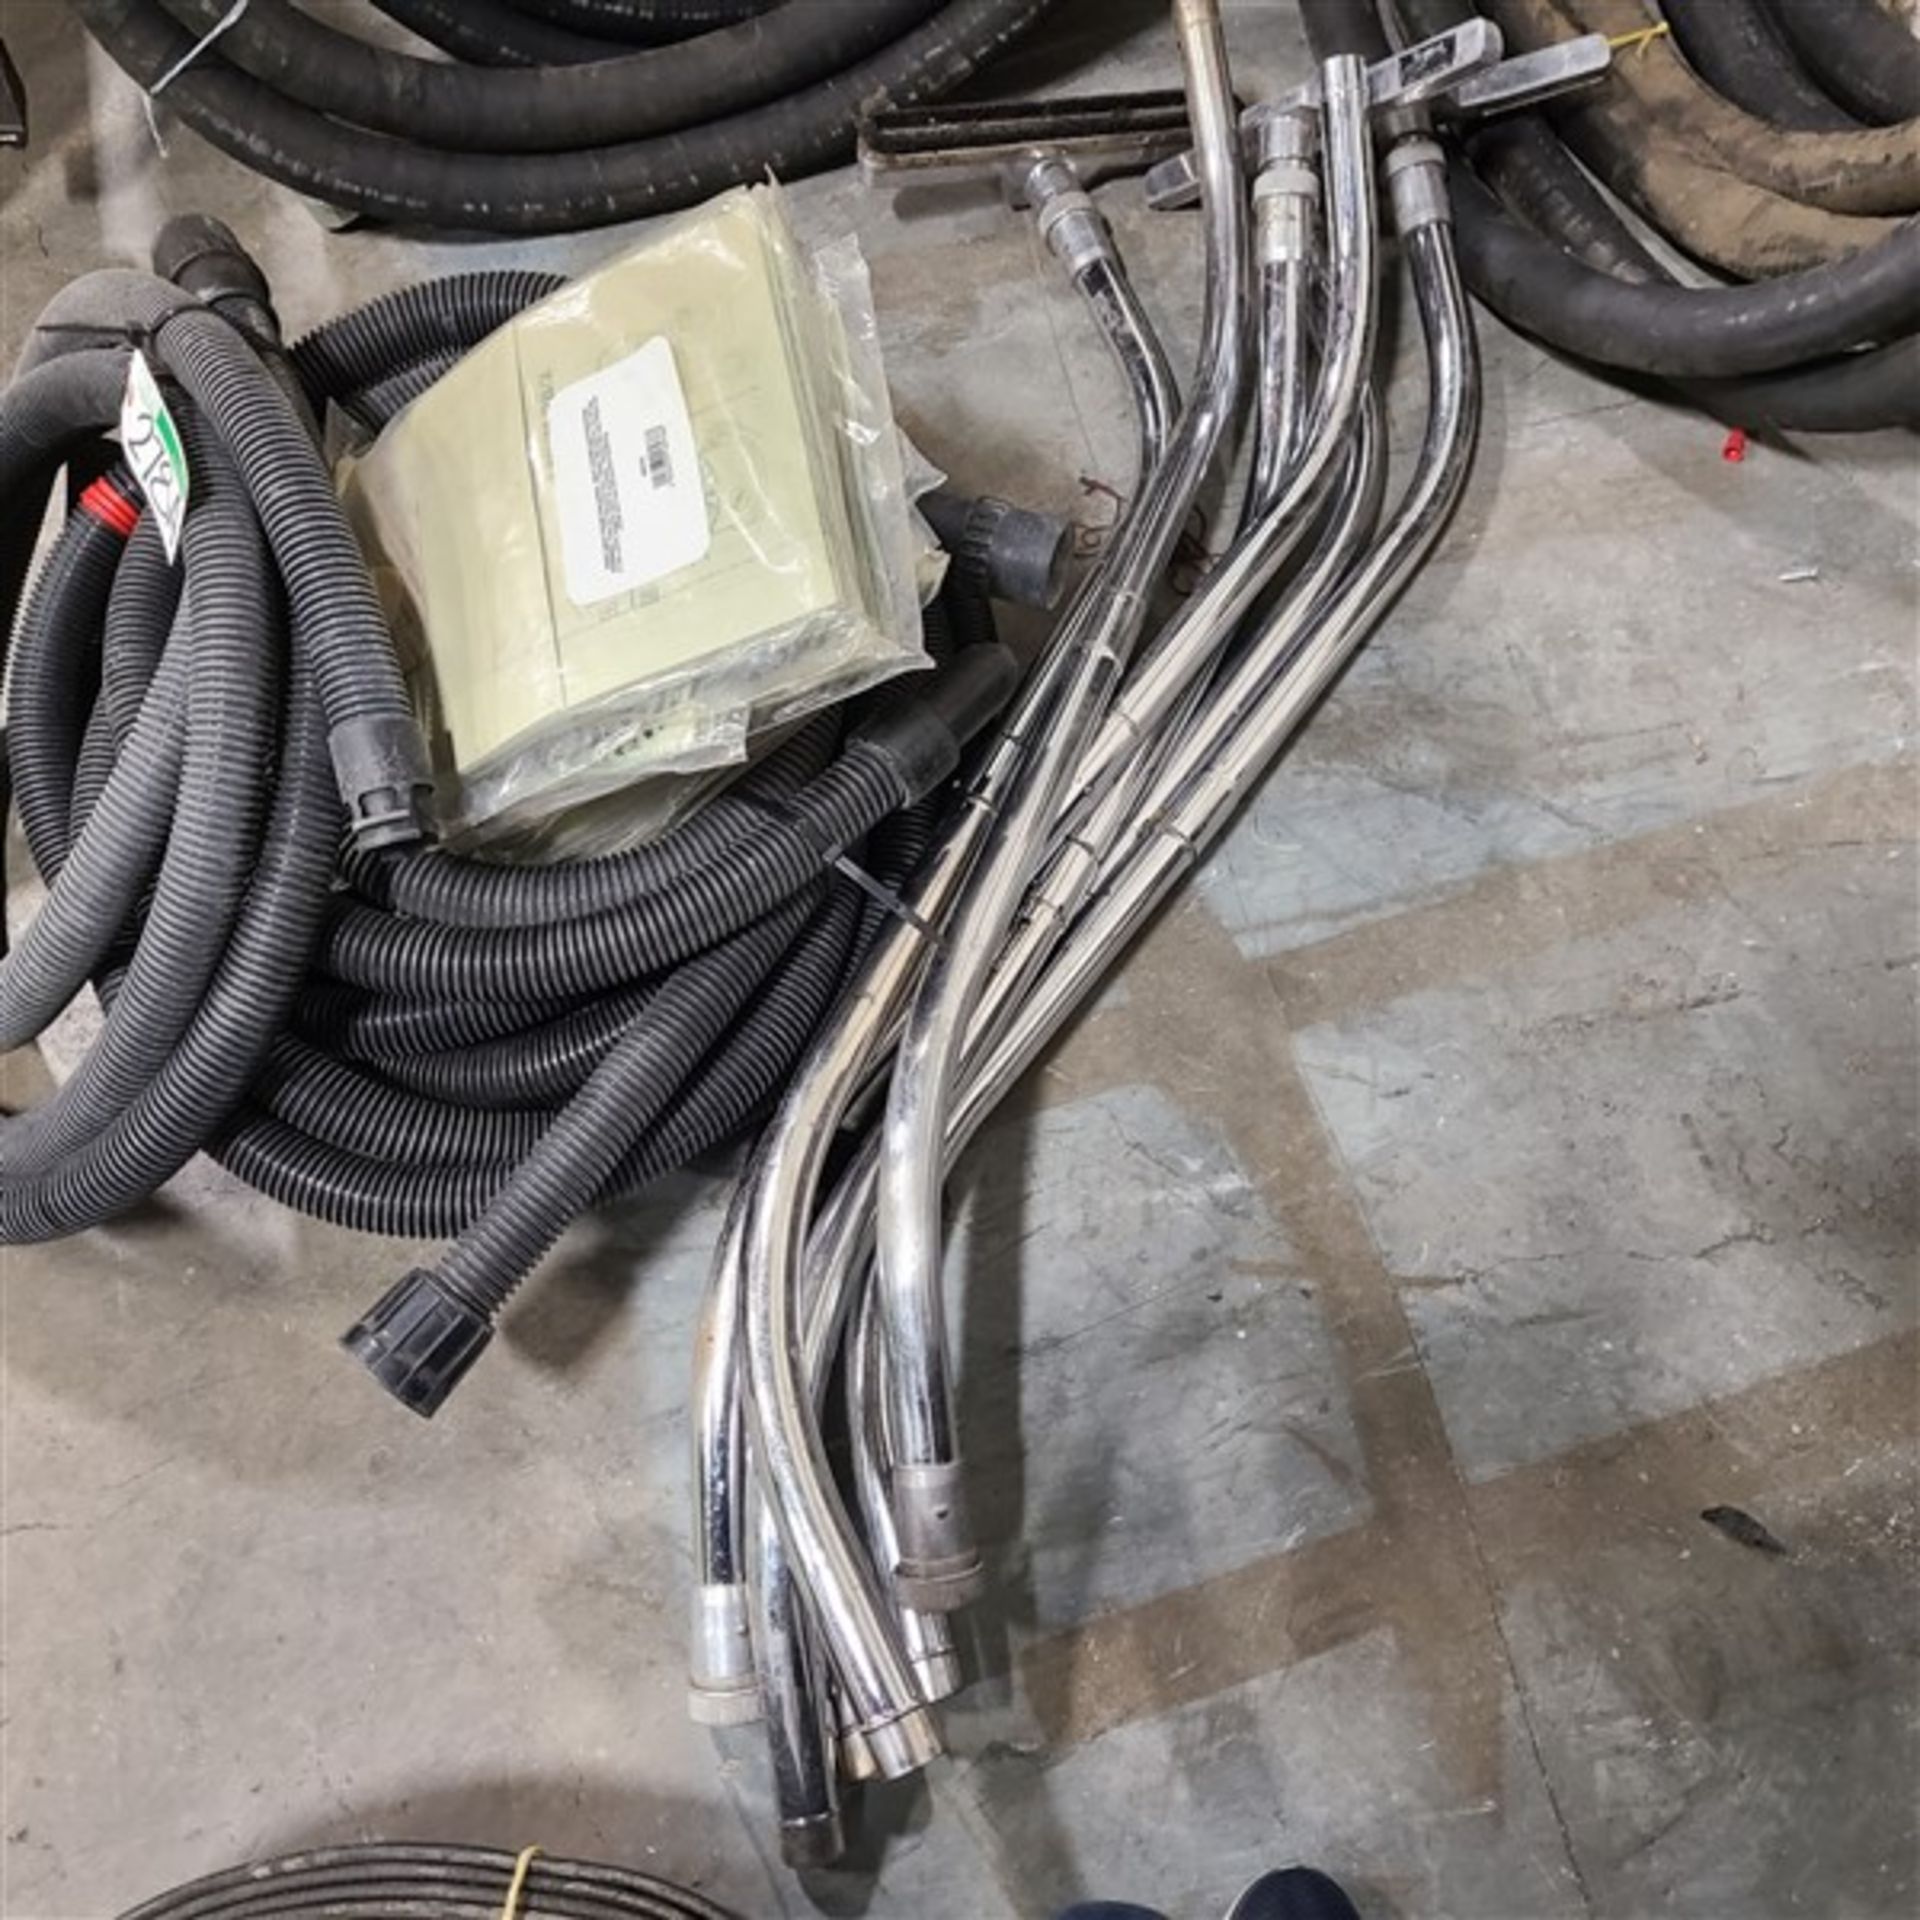 LOT OF VACUUM CLEANER HOSE, WANDS AND BAGS - Image 2 of 4